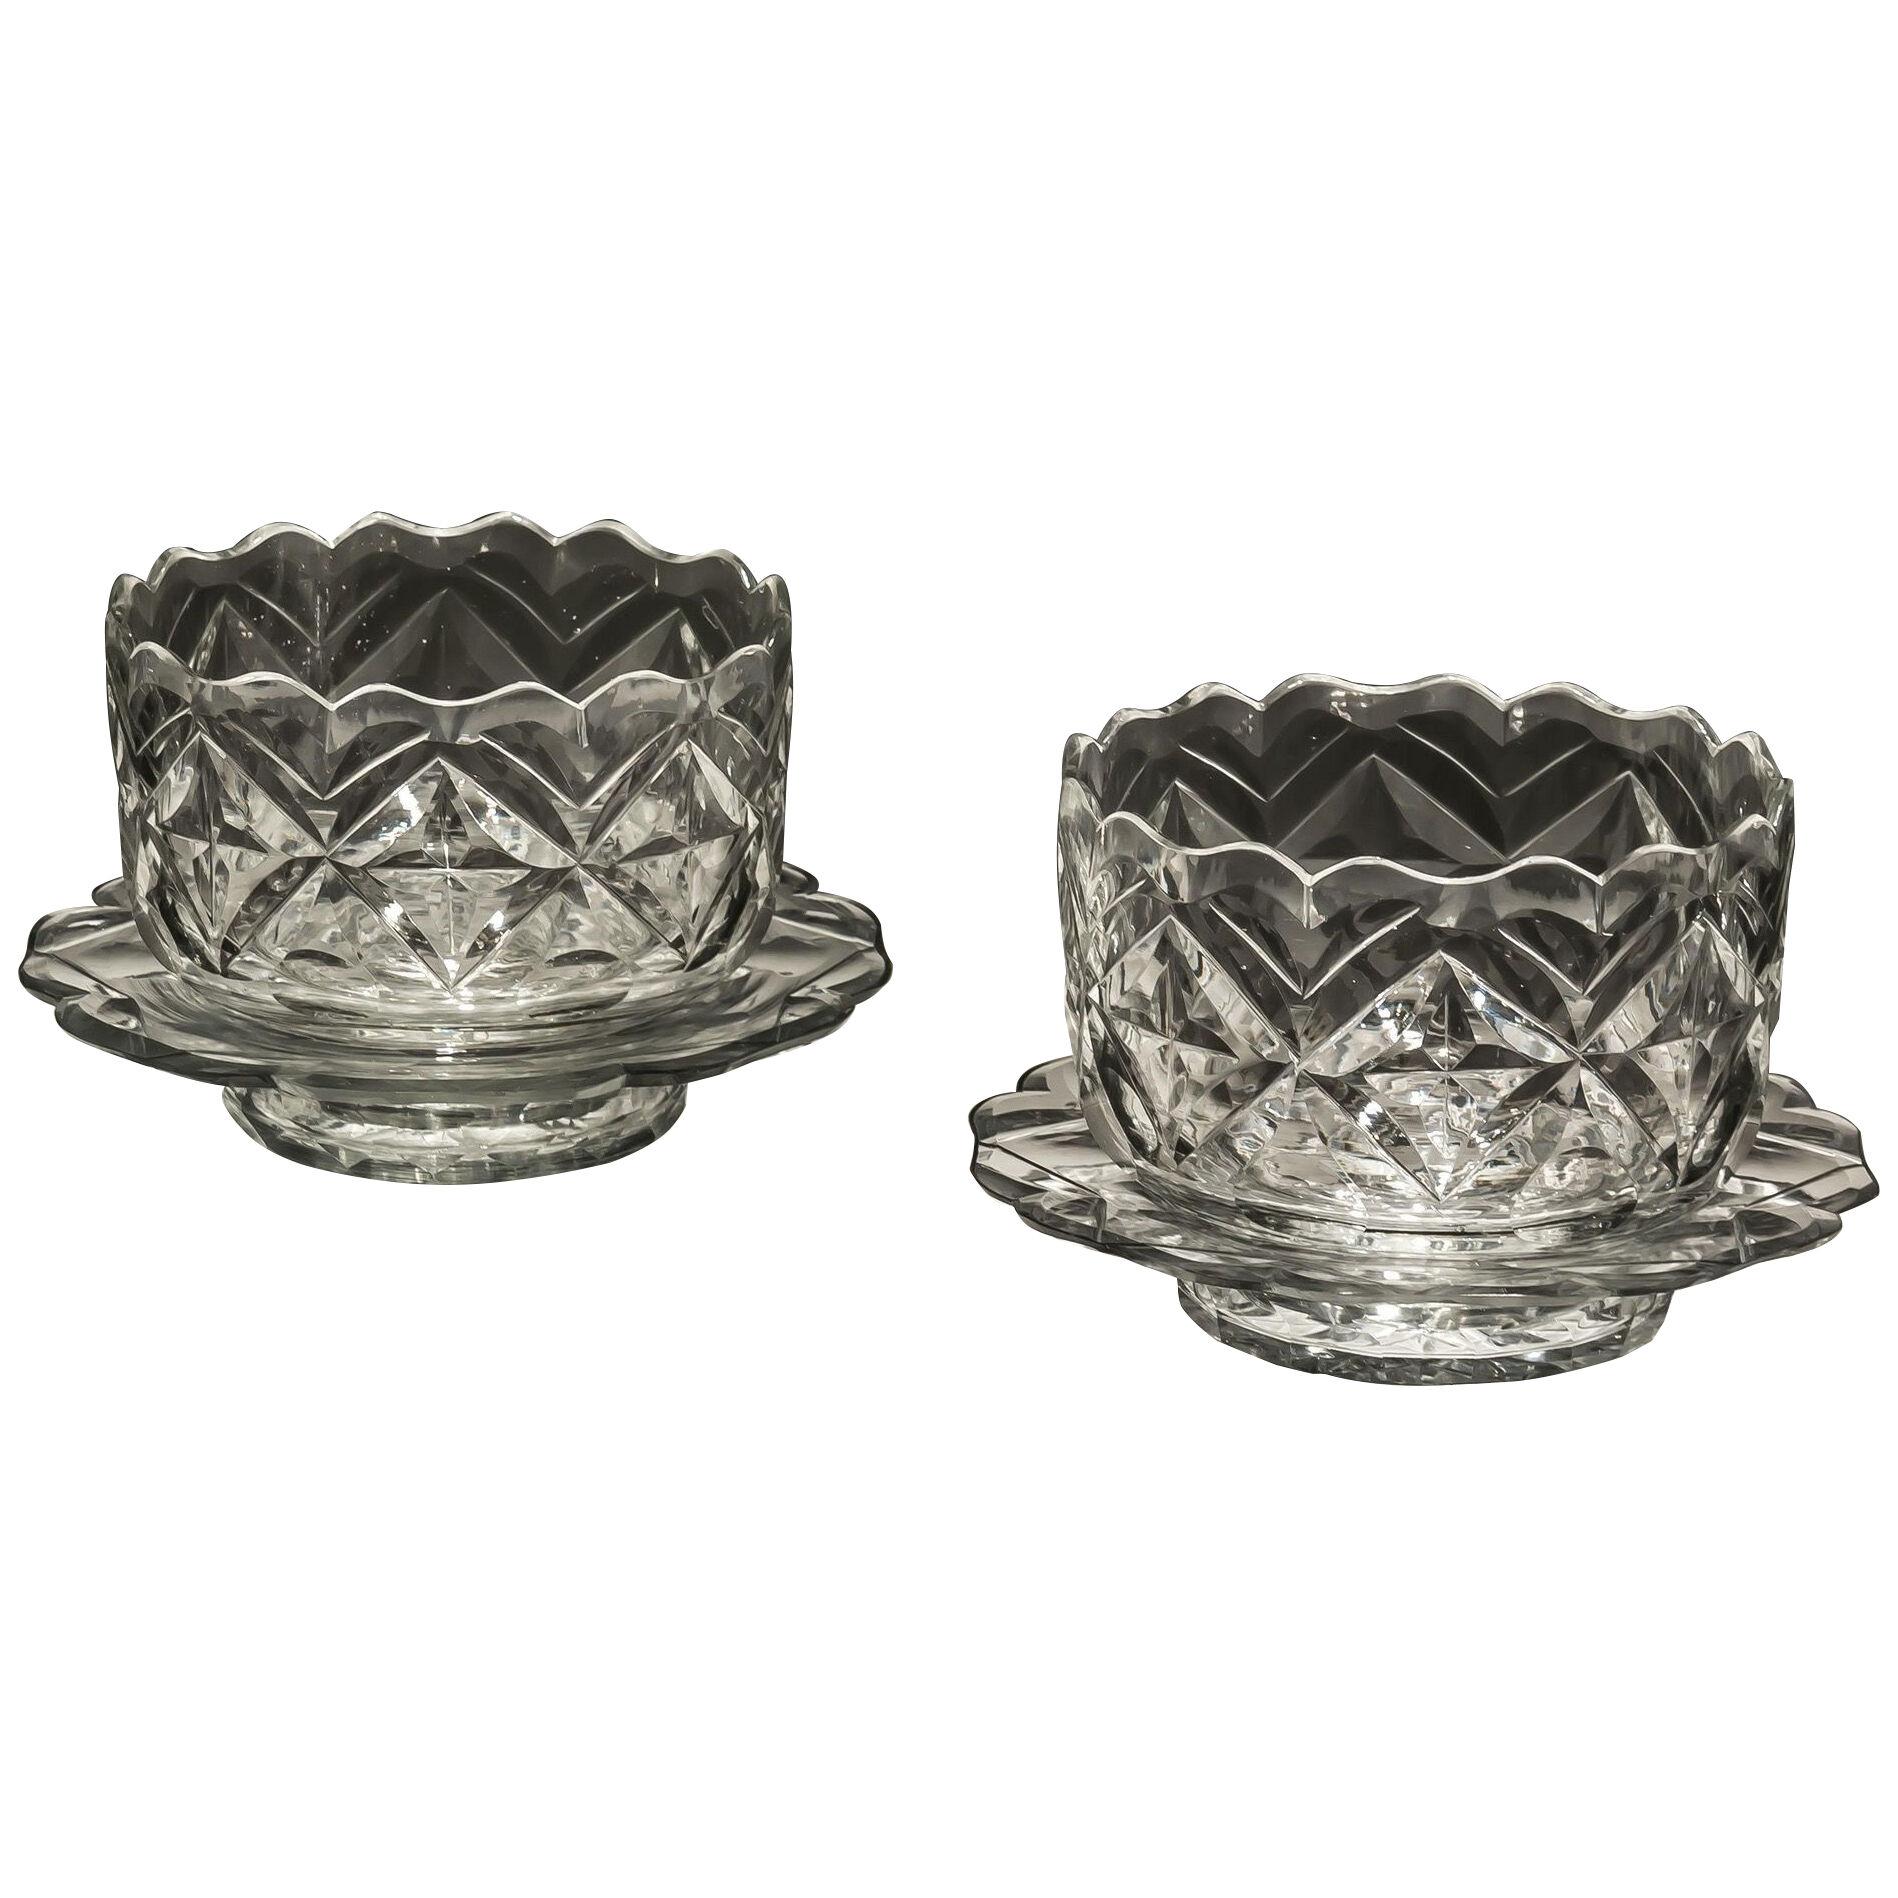 A PAIR OF GEORGE III SERVING BOWLS